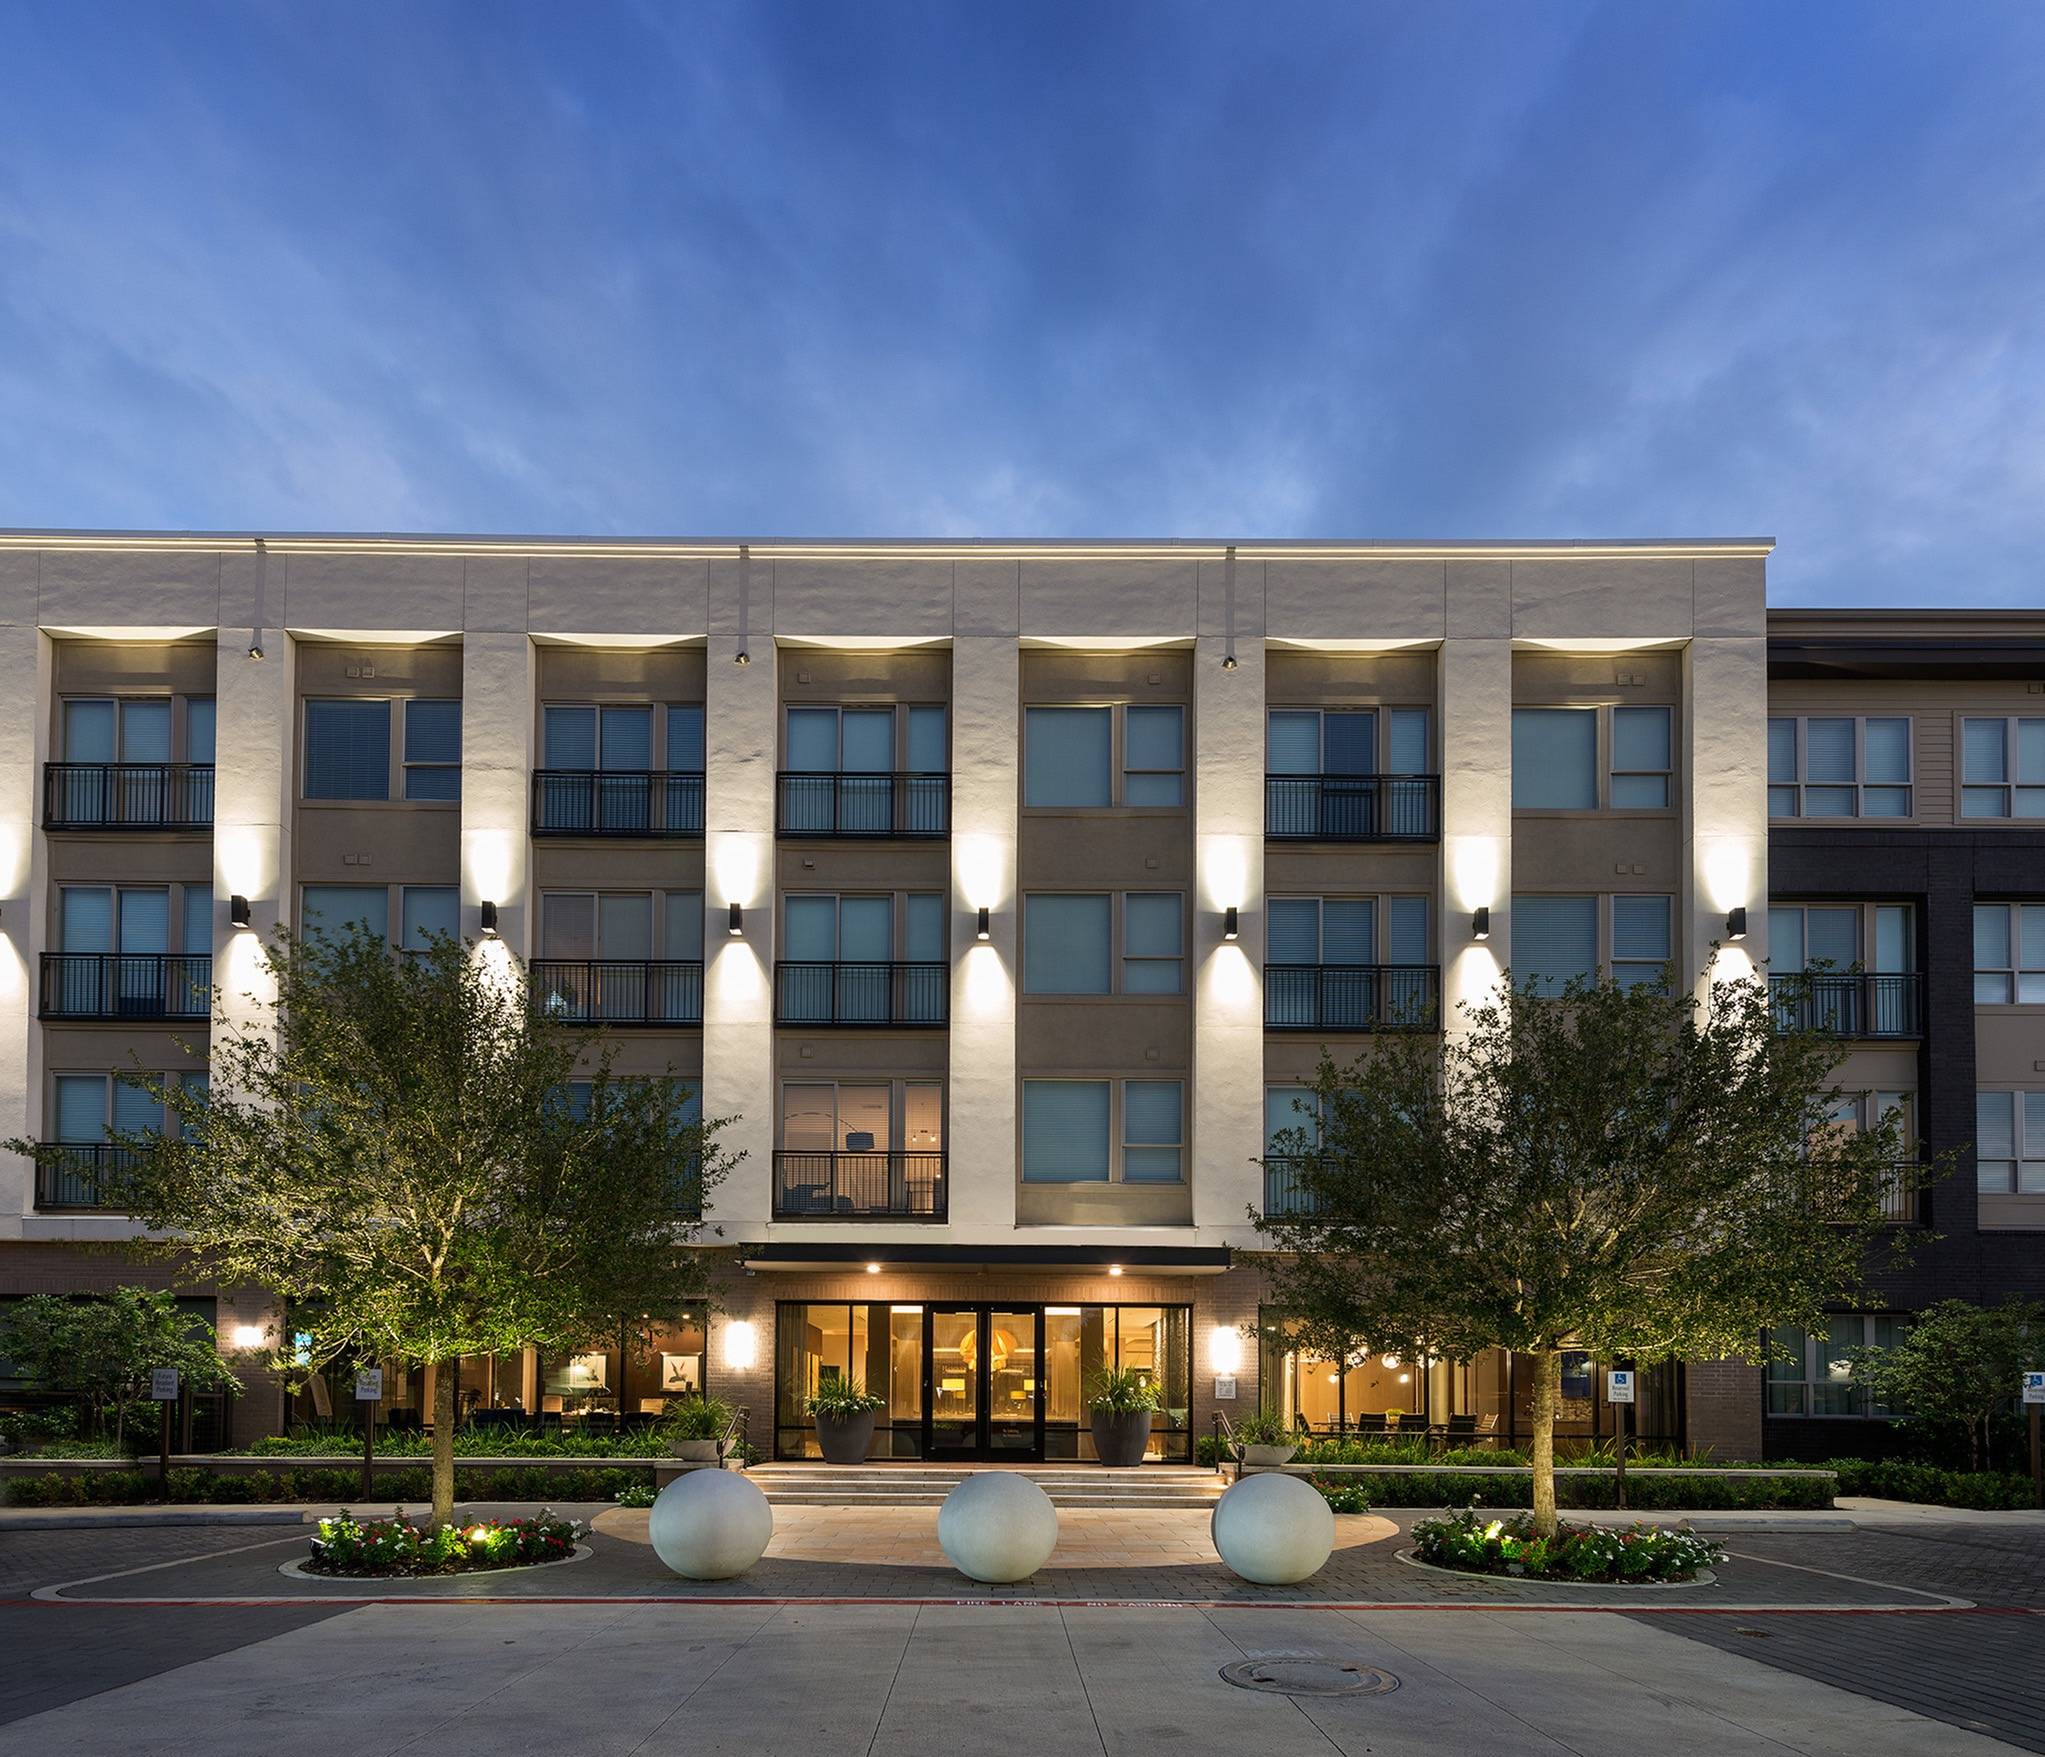 clearfork fort worth apartments